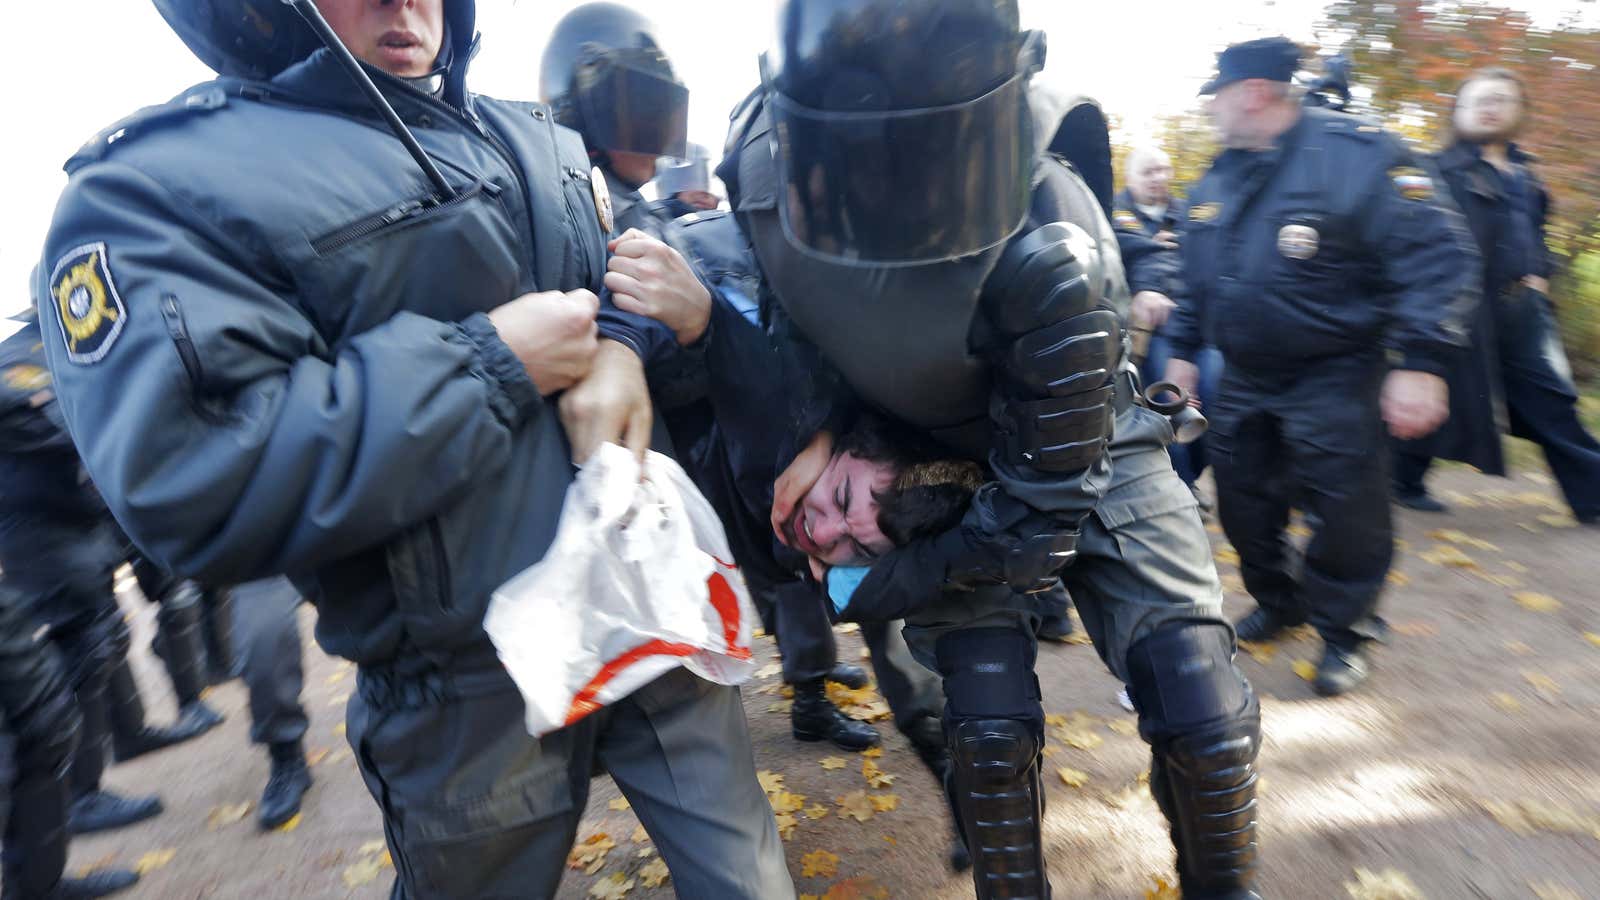 Mass arrests are common at protests in Russia.